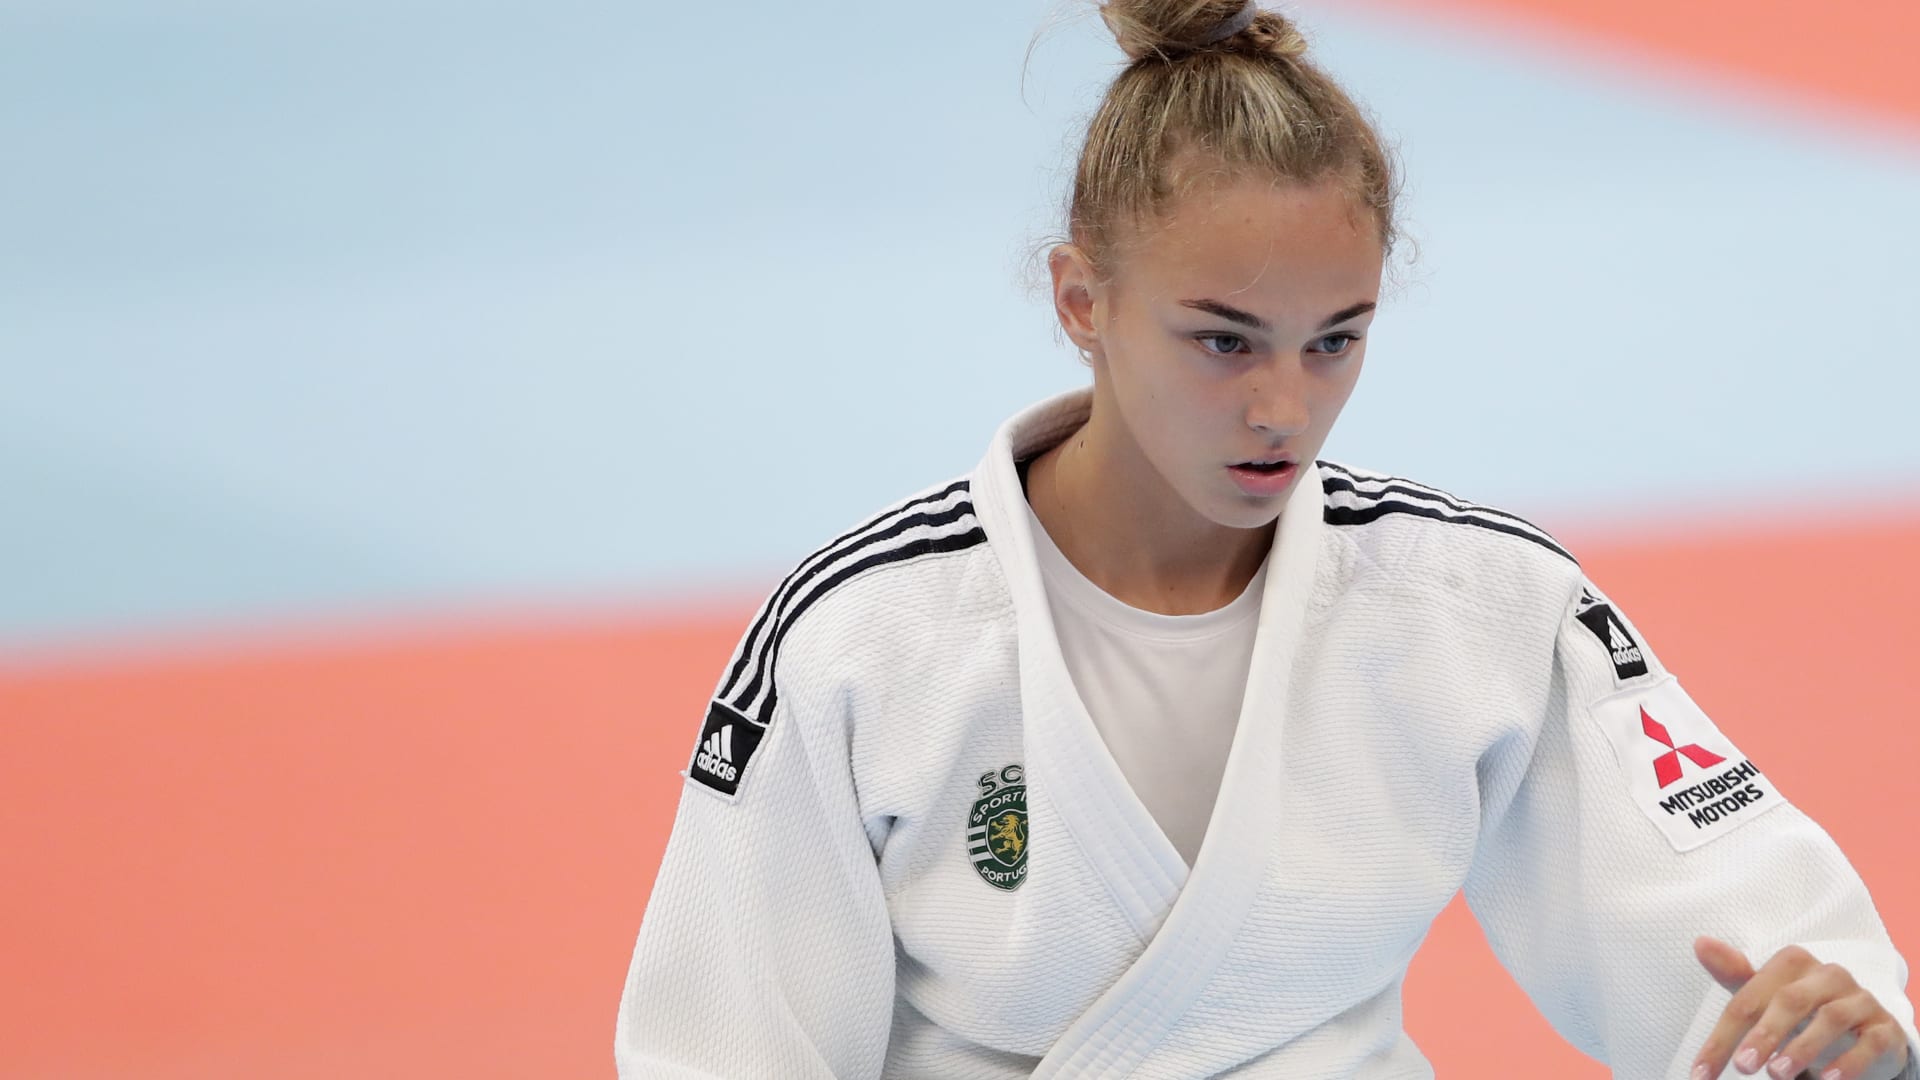 Teen Daria Bilodid channels aggression to retain her world judo crown